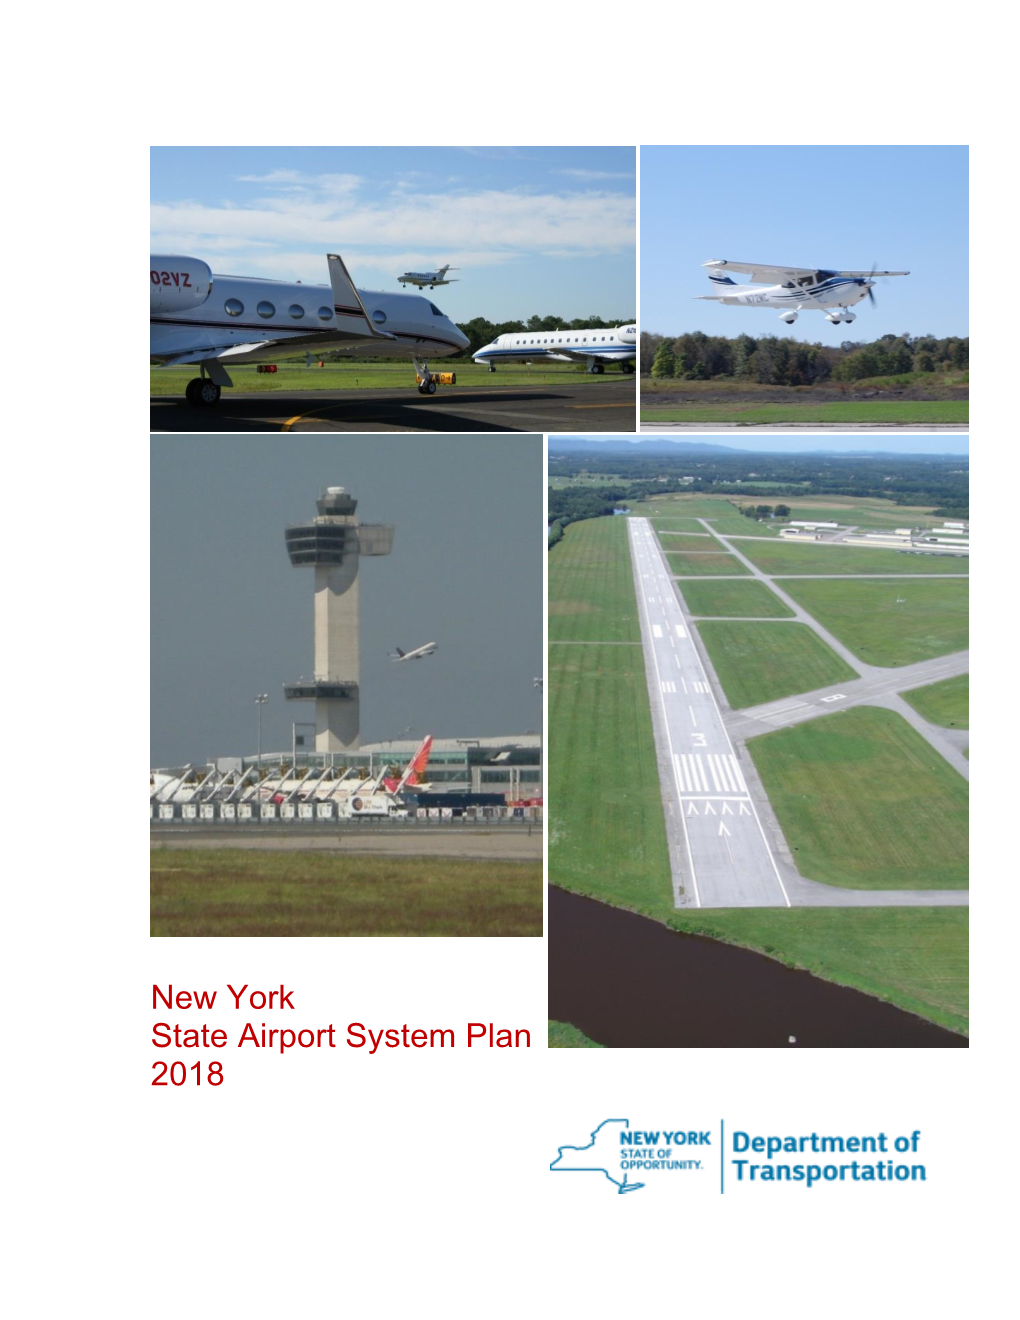 New York State Airport System Plan 2017